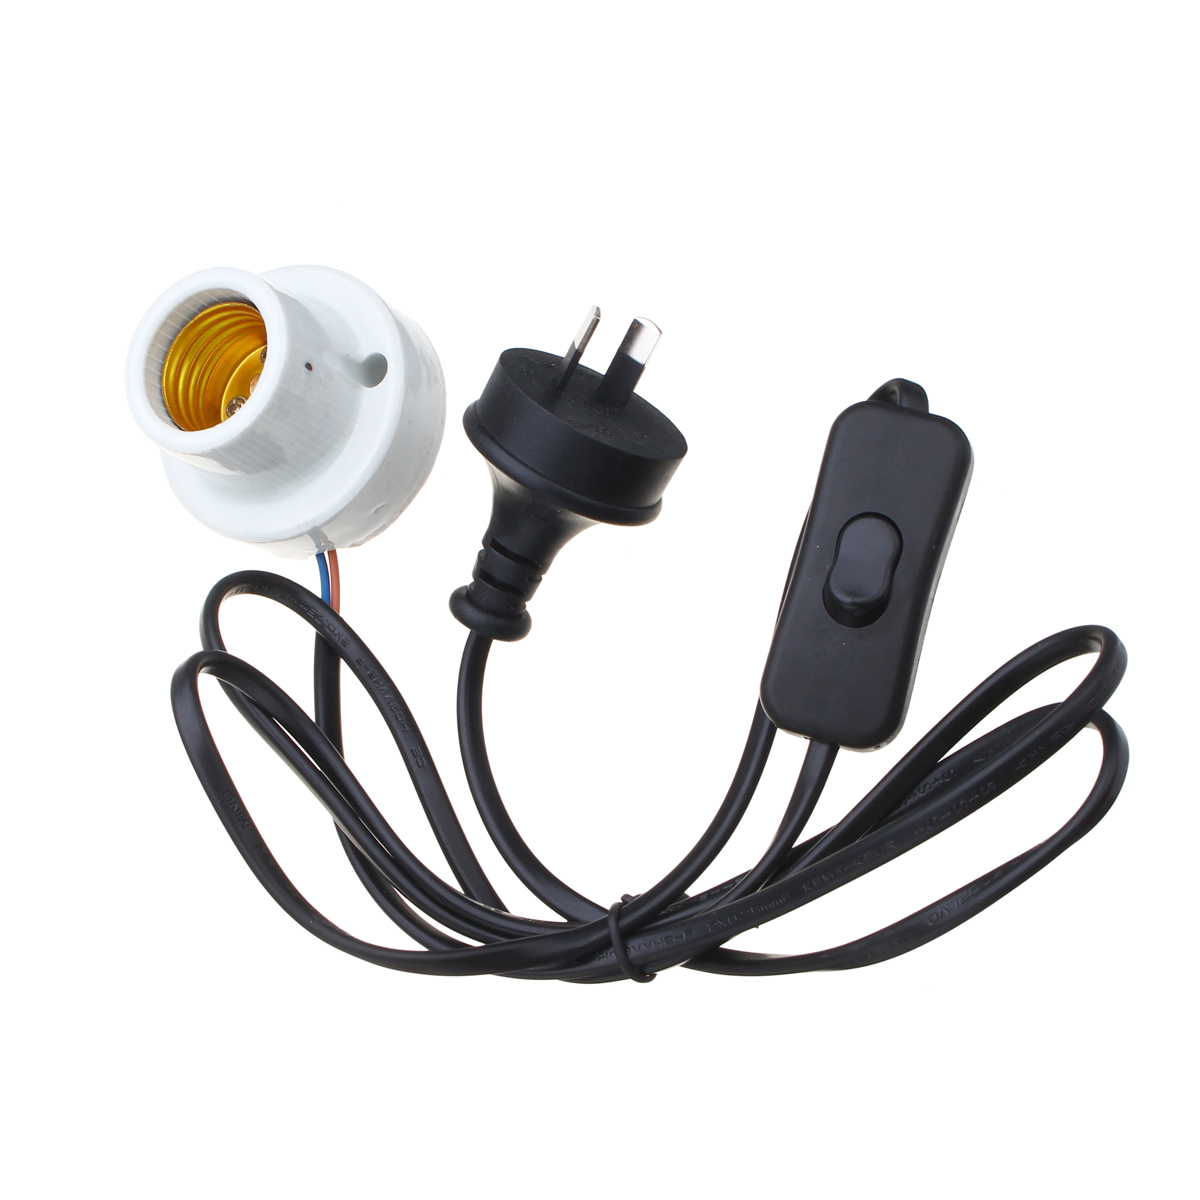 E27-Straight-Mouth-Reptile-Ceramic-Heat-Lampholder-Bulb-Adapter-with-Switch-AC110-240V-1287370-5